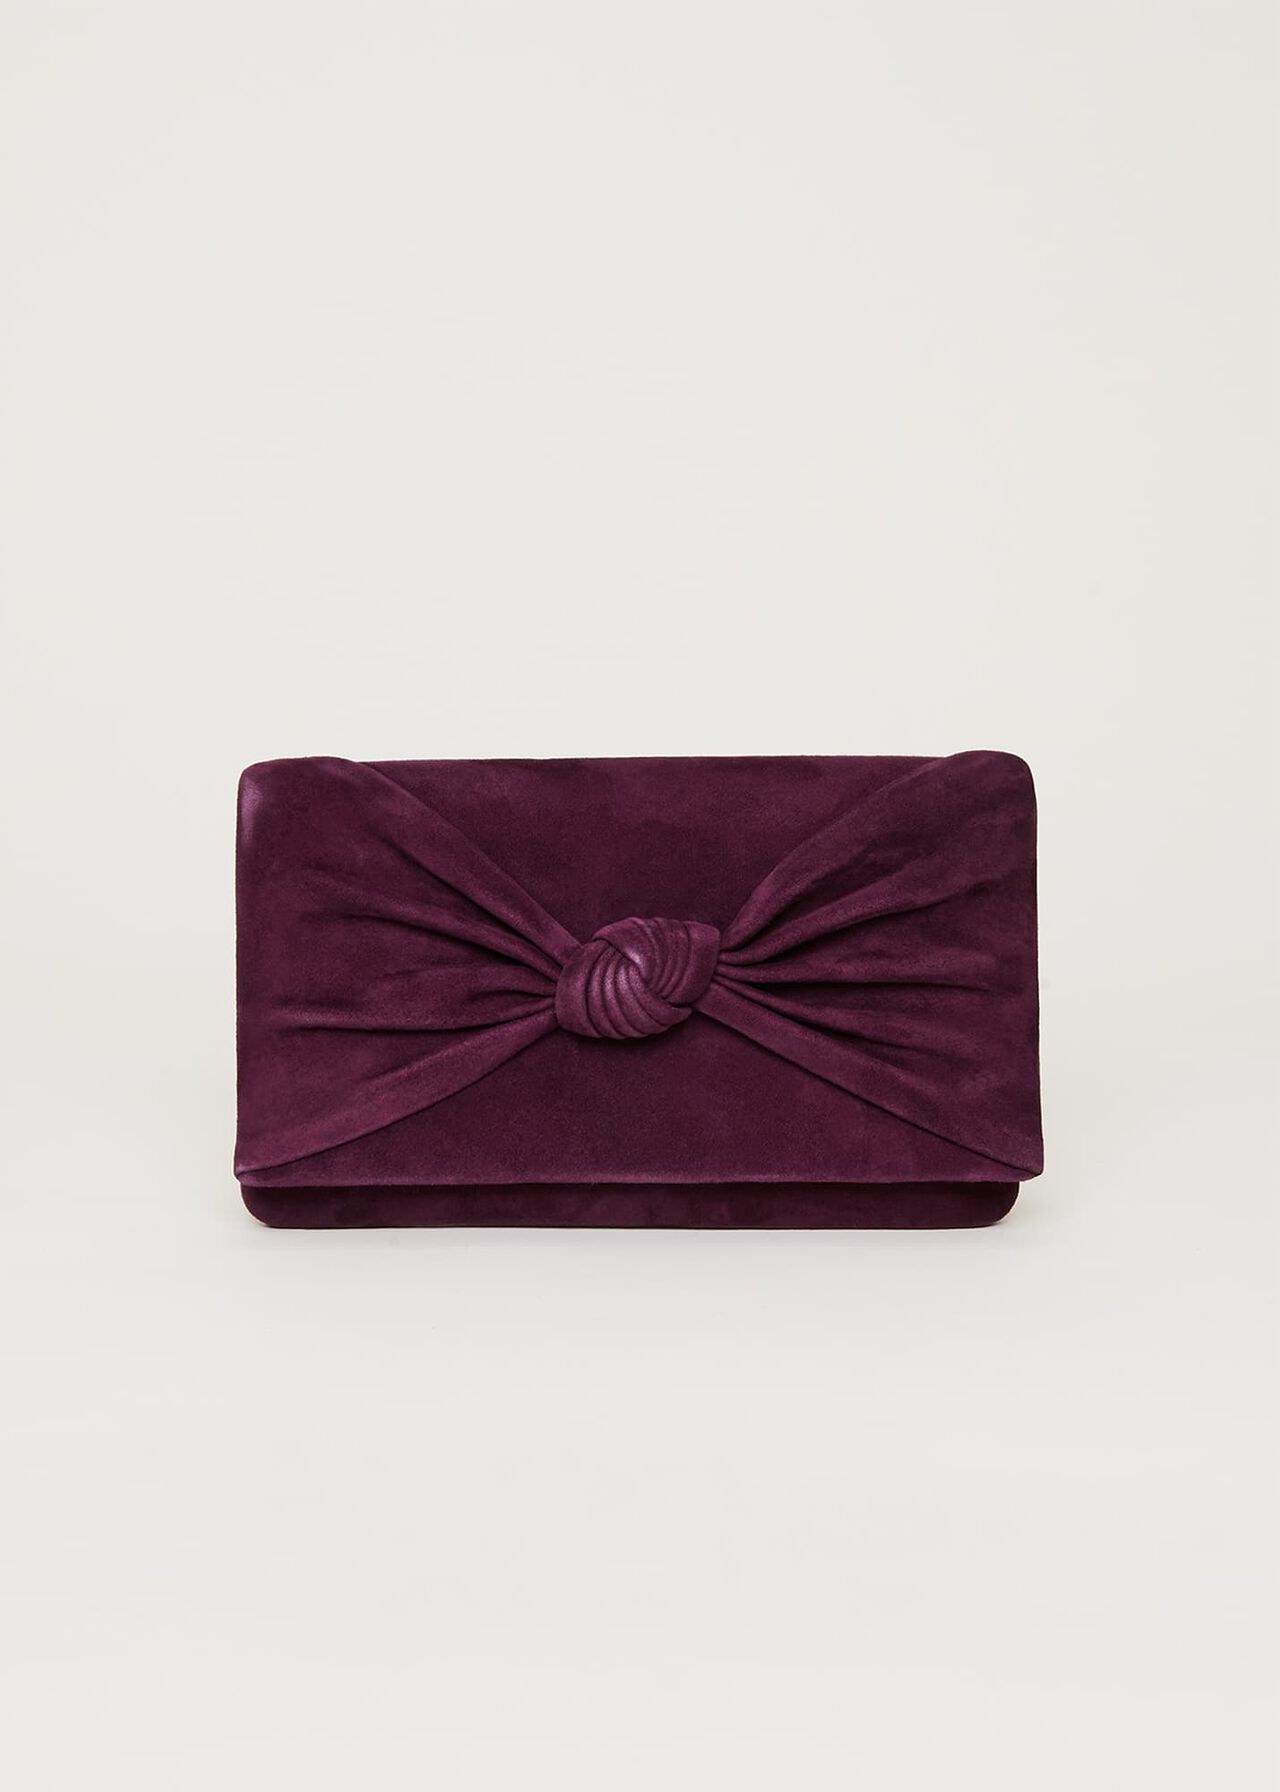 Knot Front Clutch Bag